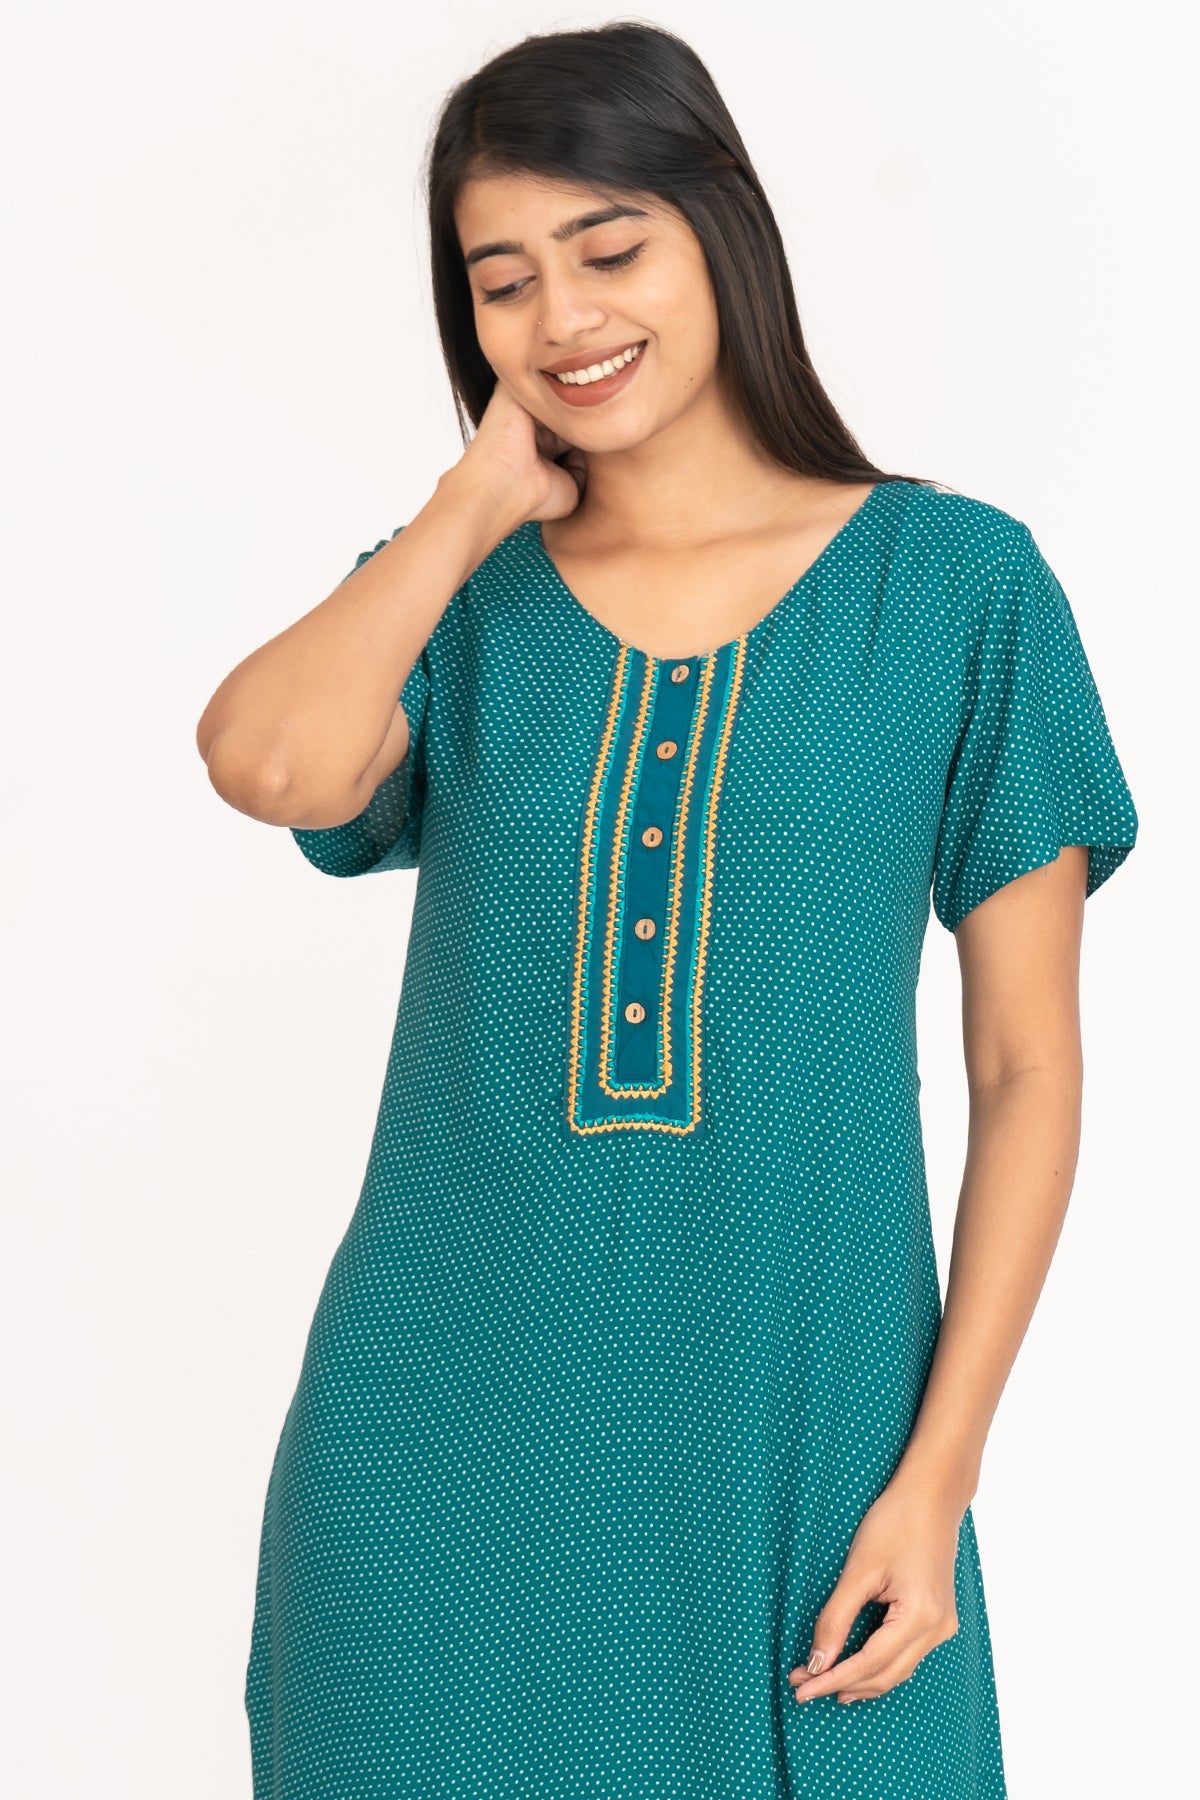 All Over Ditsy Polka Dot Print With Contrast Embroidered Yoke Nighty - Green